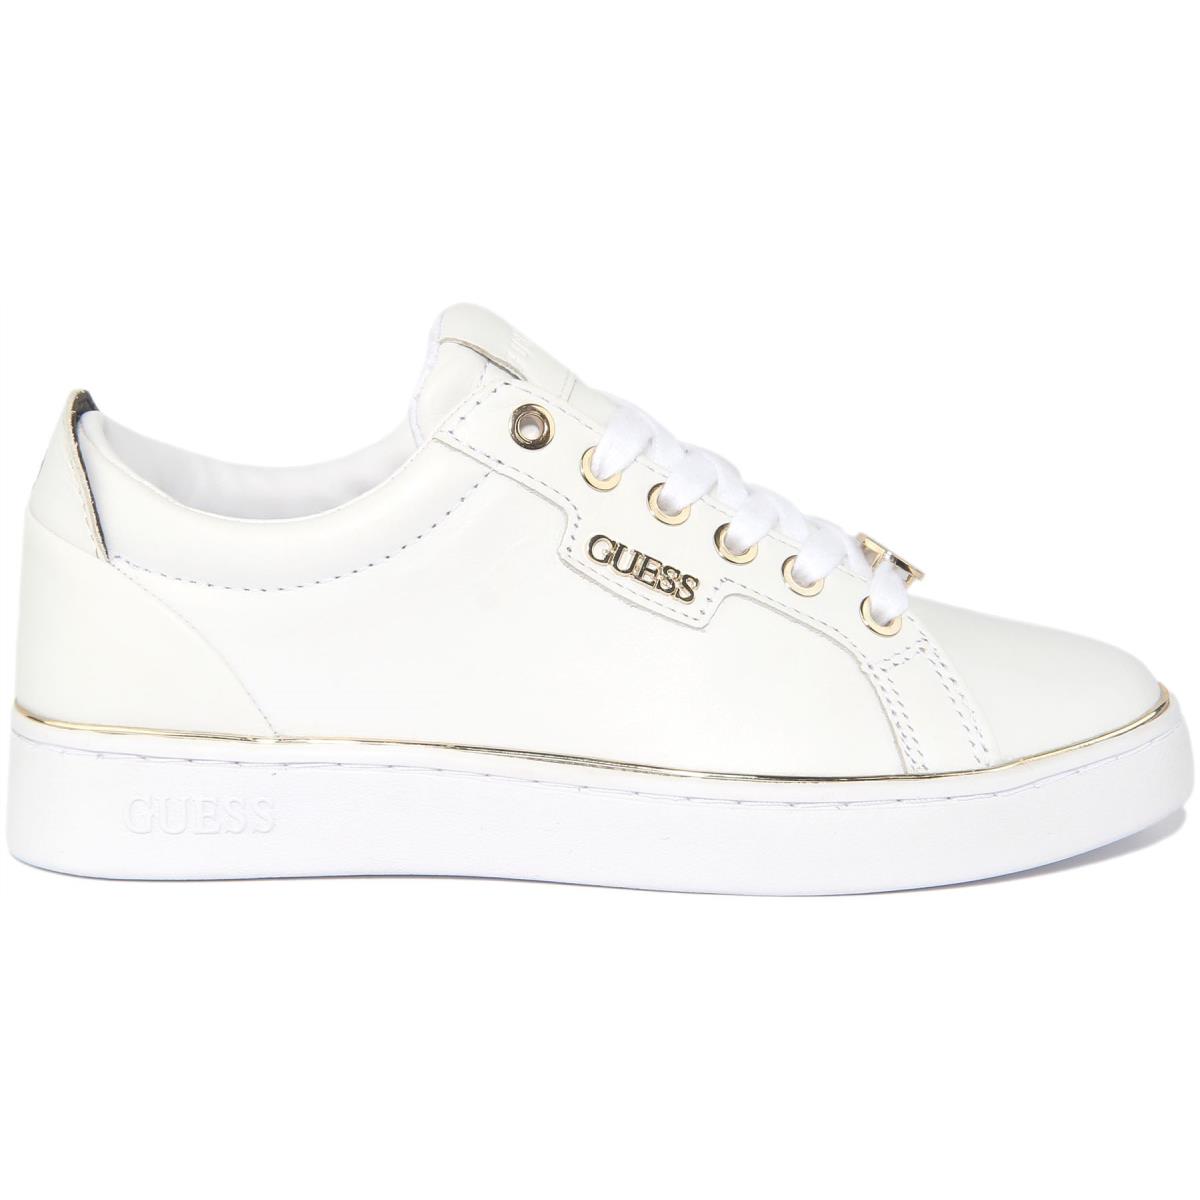 Guess Fl5Btalea12 Betea Womens Lace Up Leather Sneakers In White Size US 5 - 11